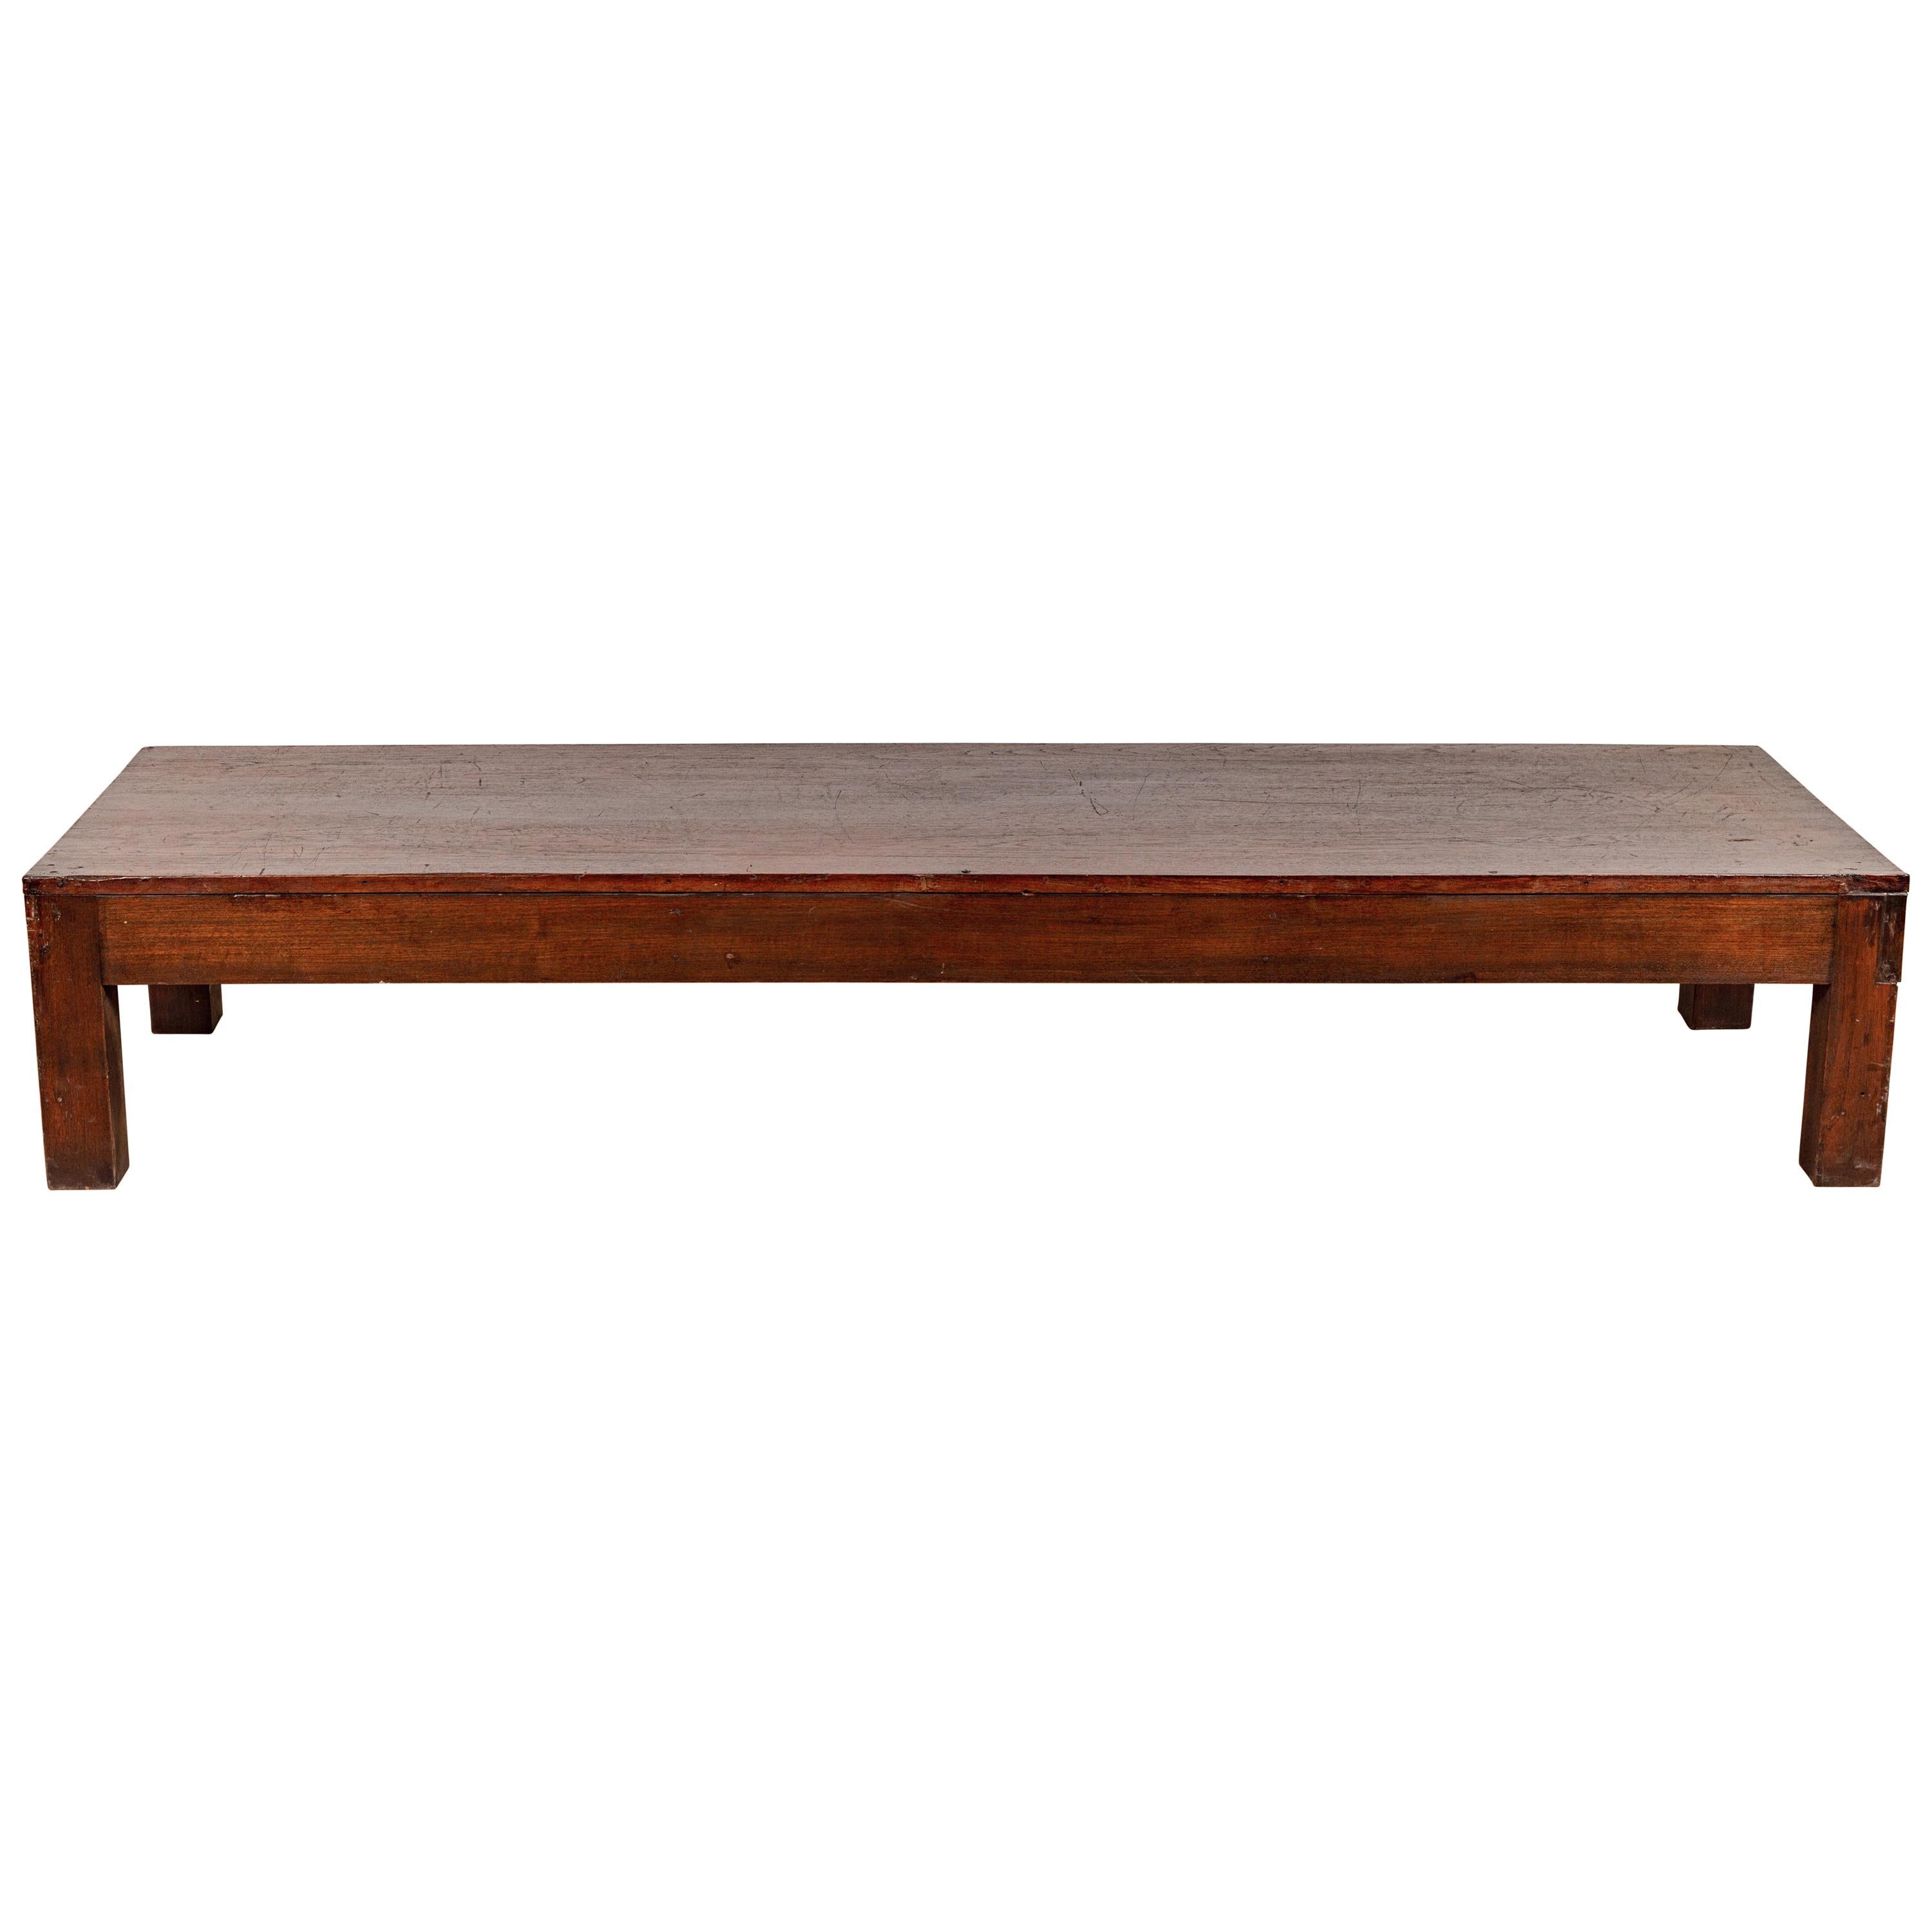 Chinese Antique Long Low Prayer Table with Walnut Patina and Square Legs